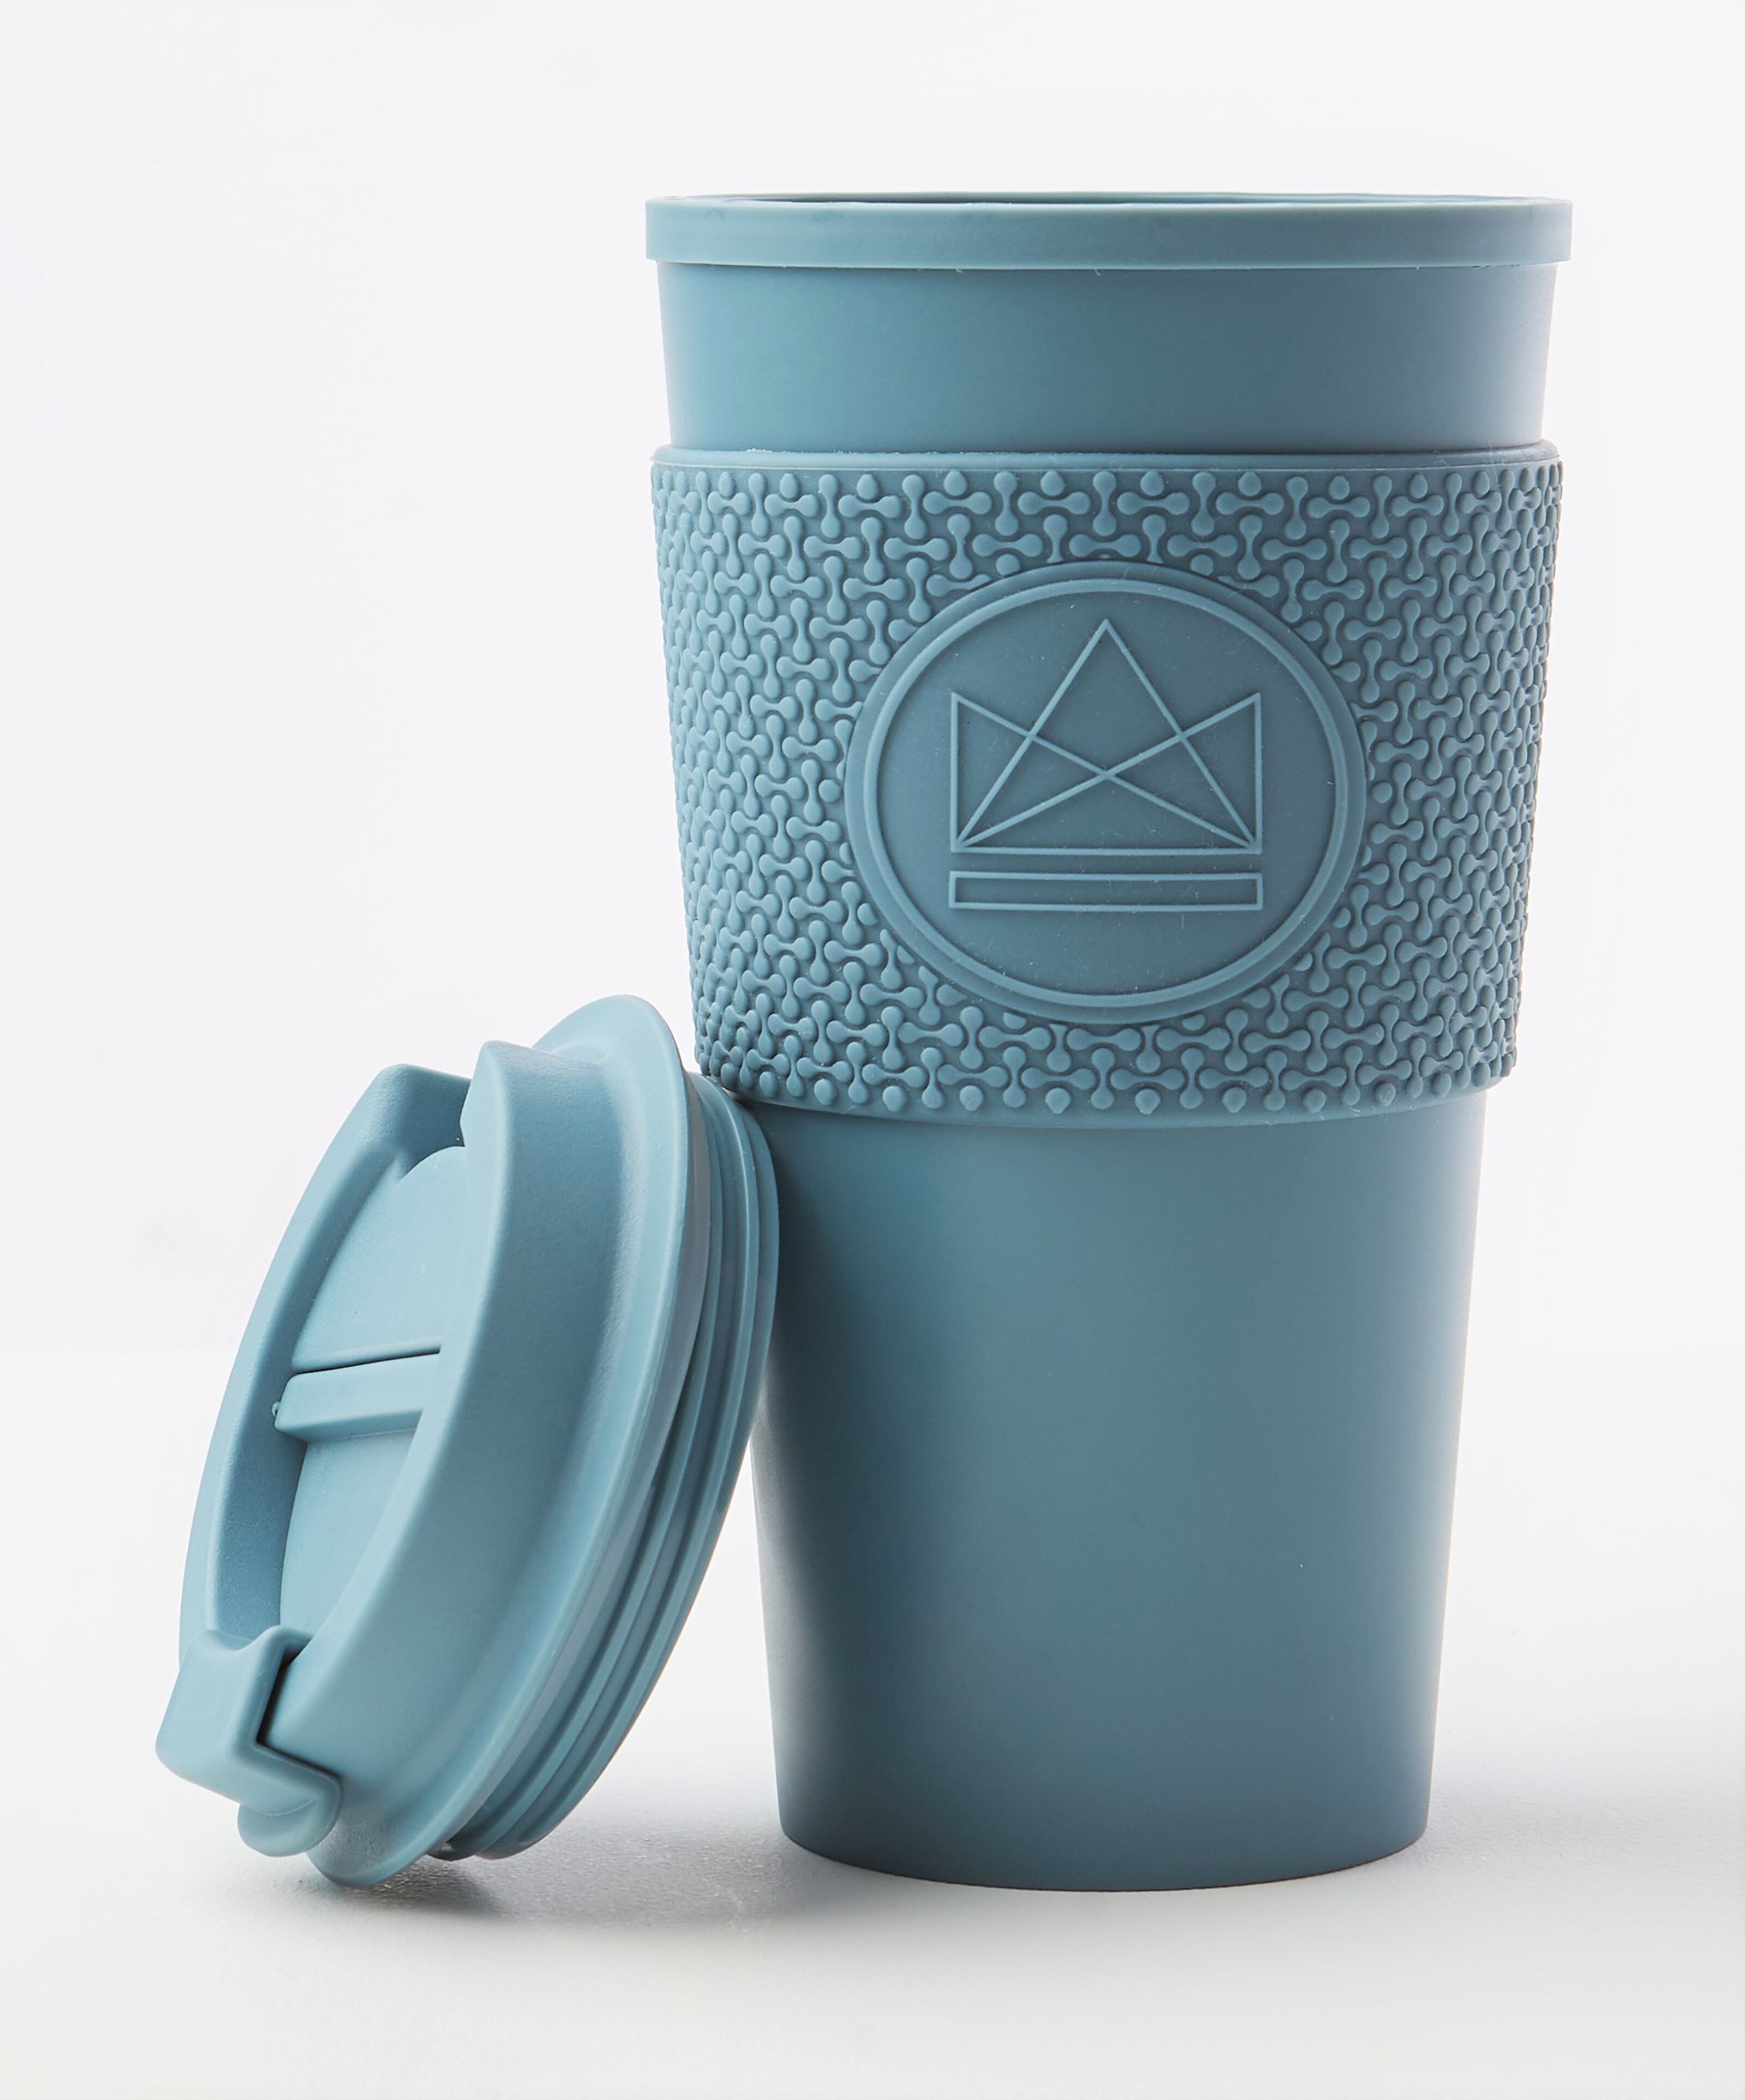 Neon Kactus - Double-Walled Coffee Cup, Reusable Coffee Cup with